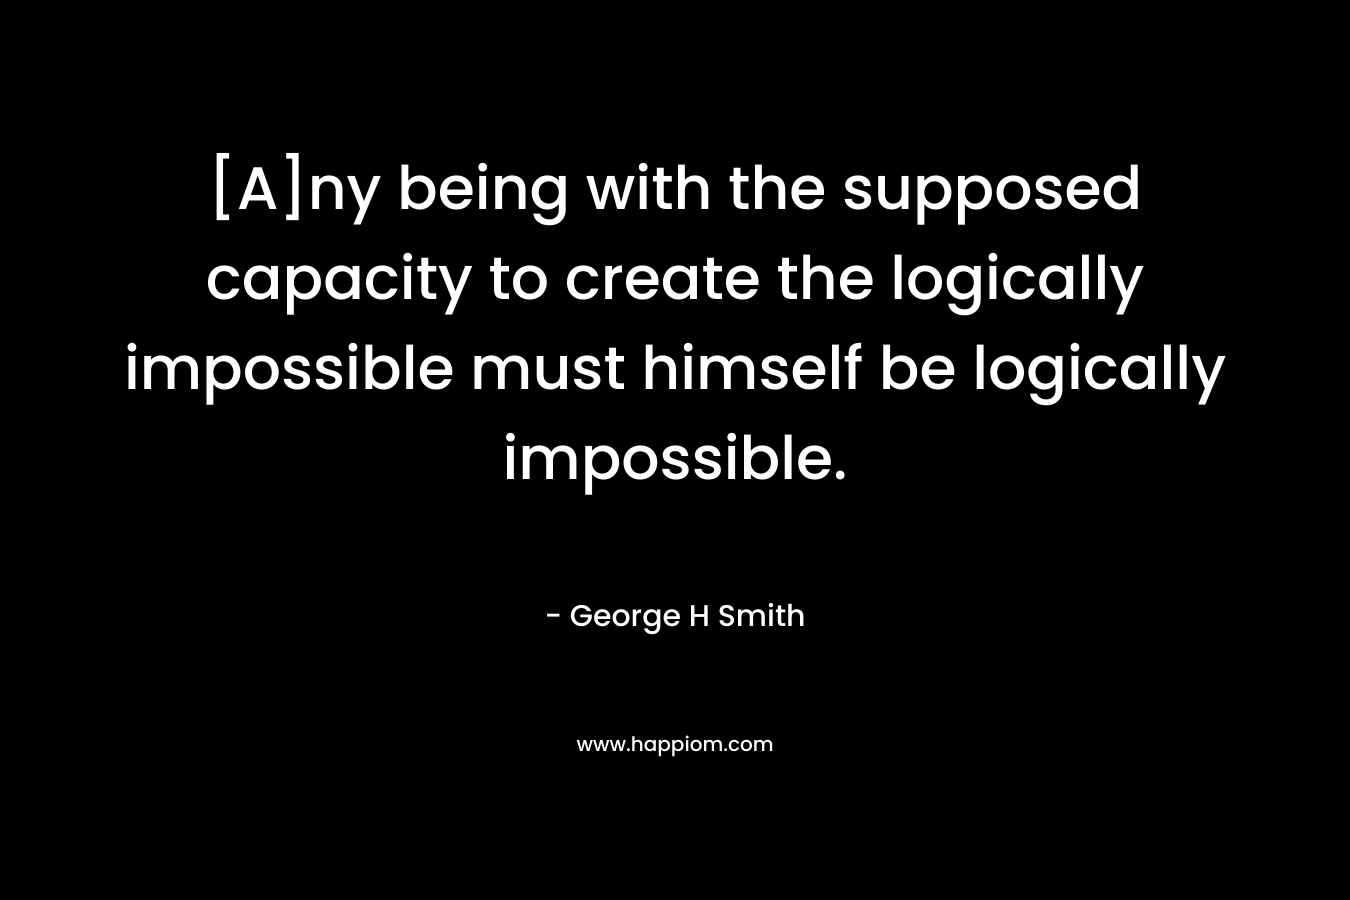 [A]ny being with the supposed capacity to create the logically impossible must himself be logically impossible.